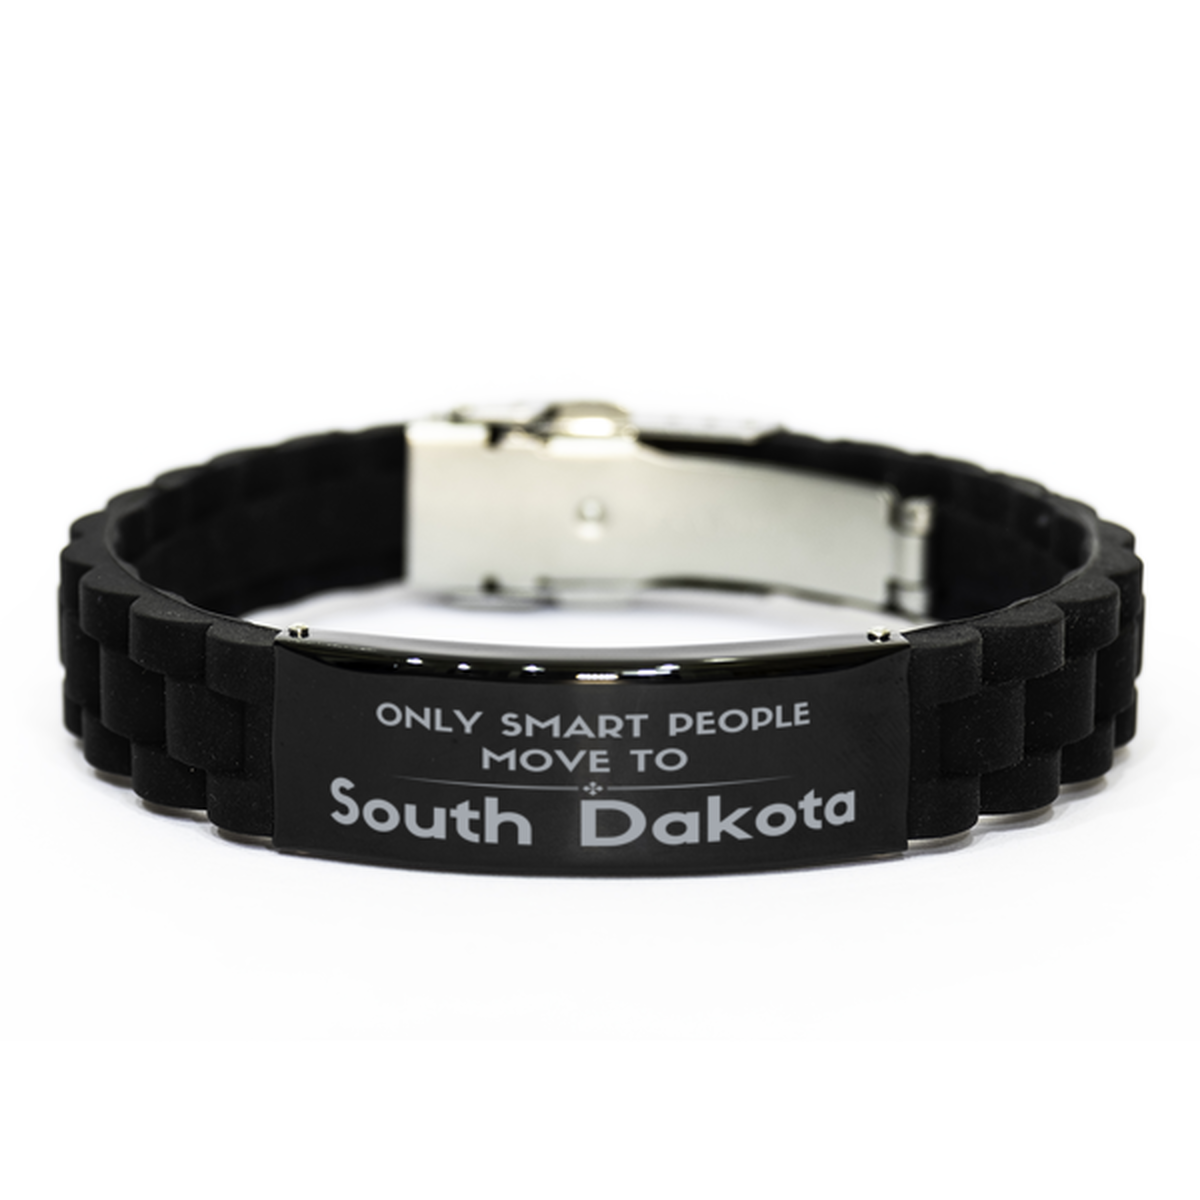 Only smart people move to South Dakota Black Glidelock Clasp Bracelet, Gag Gifts For South Dakota, Move to South Dakota Gifts for Friends Coworker Funny Saying Quote